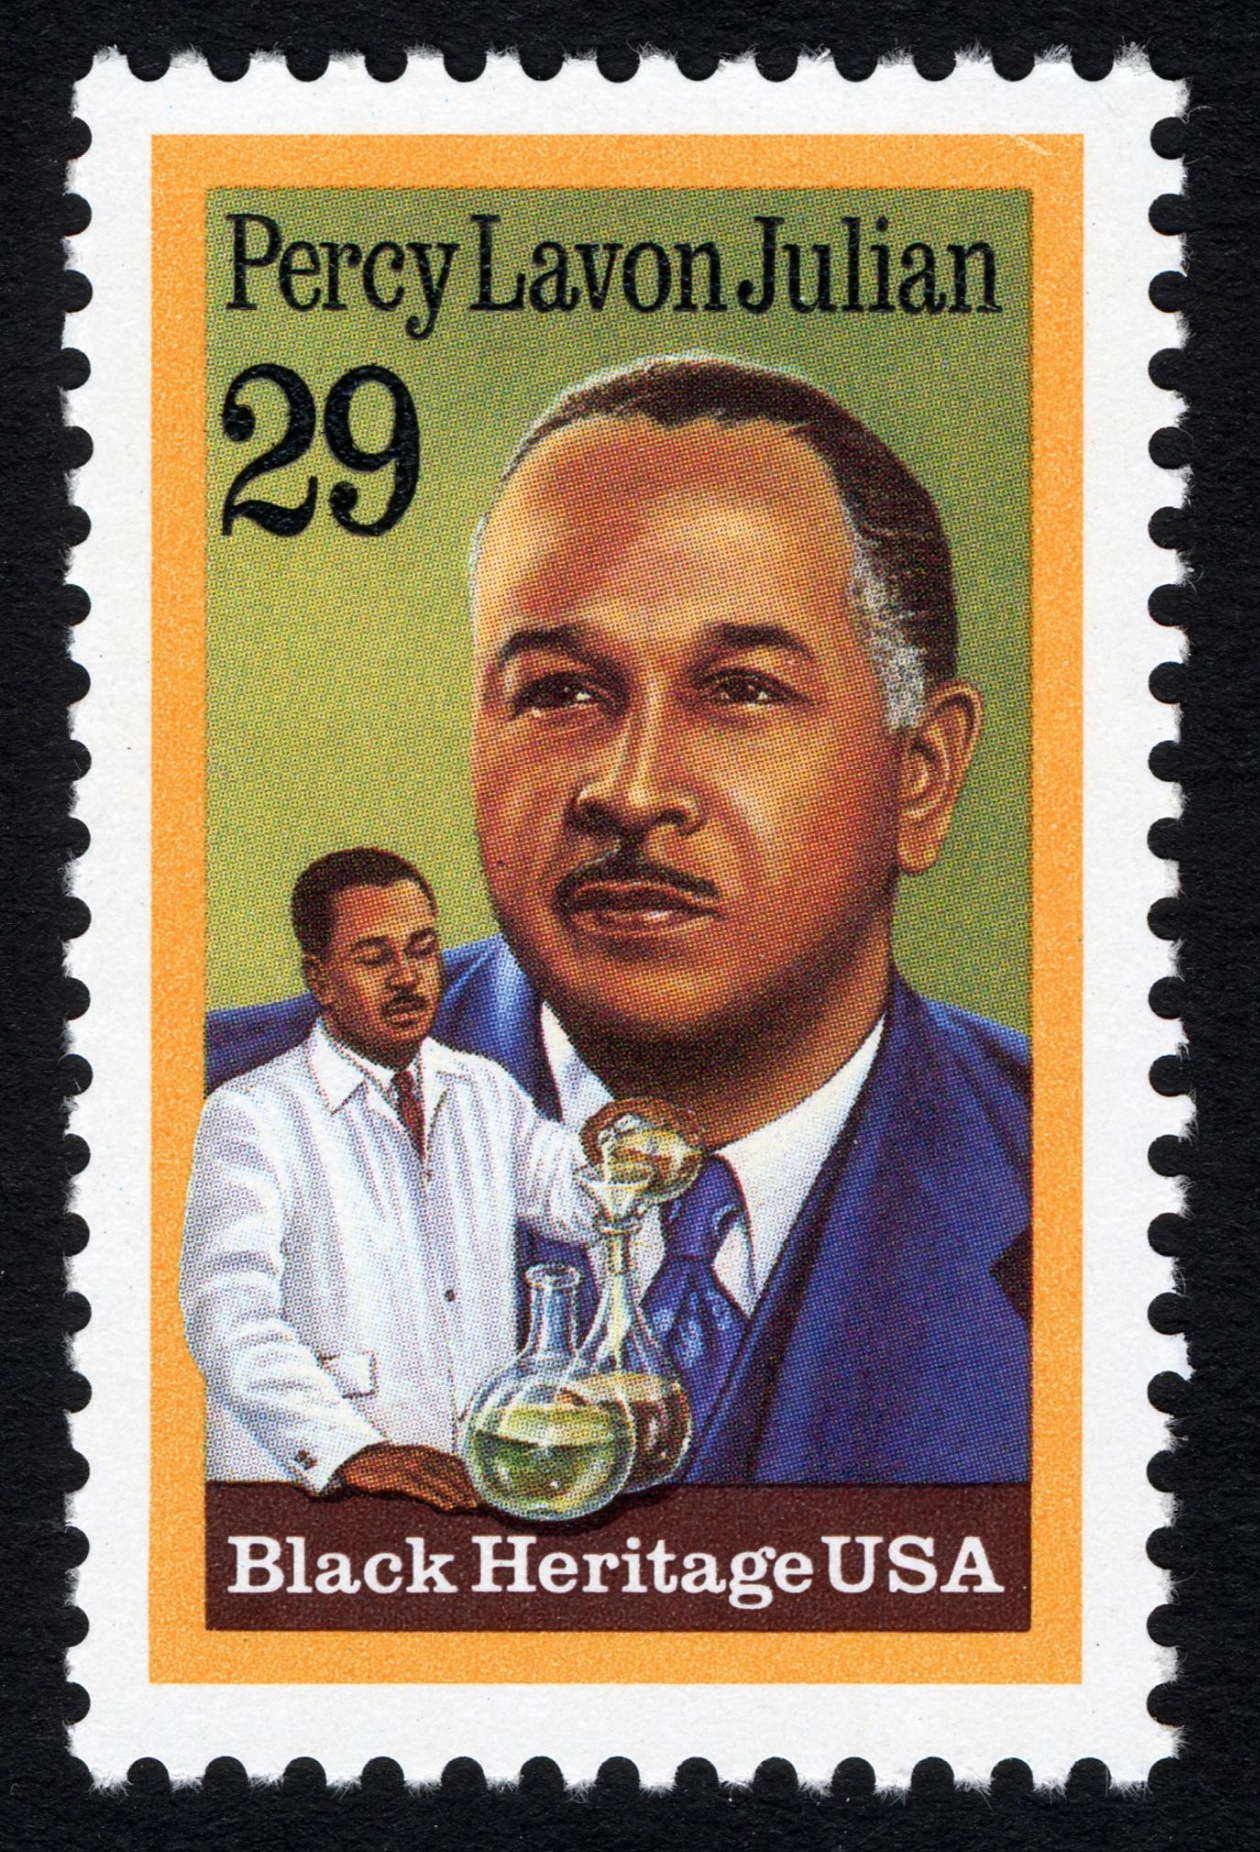 Postage stamp featuring a portrait of Percy Julian and an image of him working with laboratory equipment.